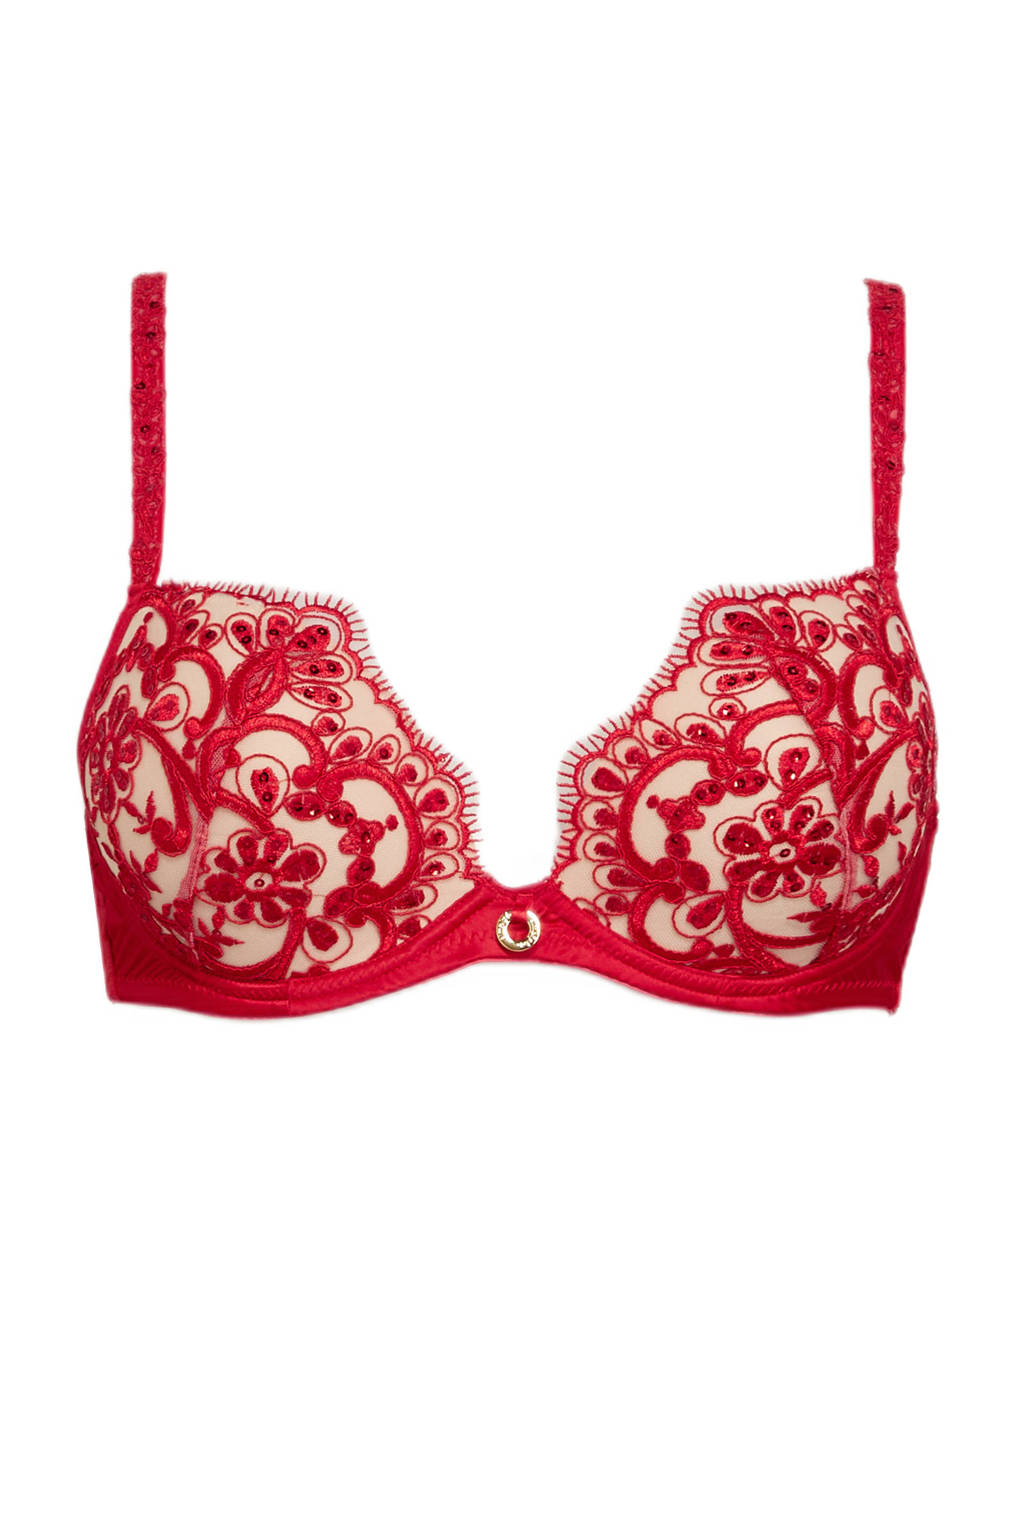 Pretty Secrets by Simply Be voorgevormde beugelbh Masquerade Magical zwart/lichtroze, Rood